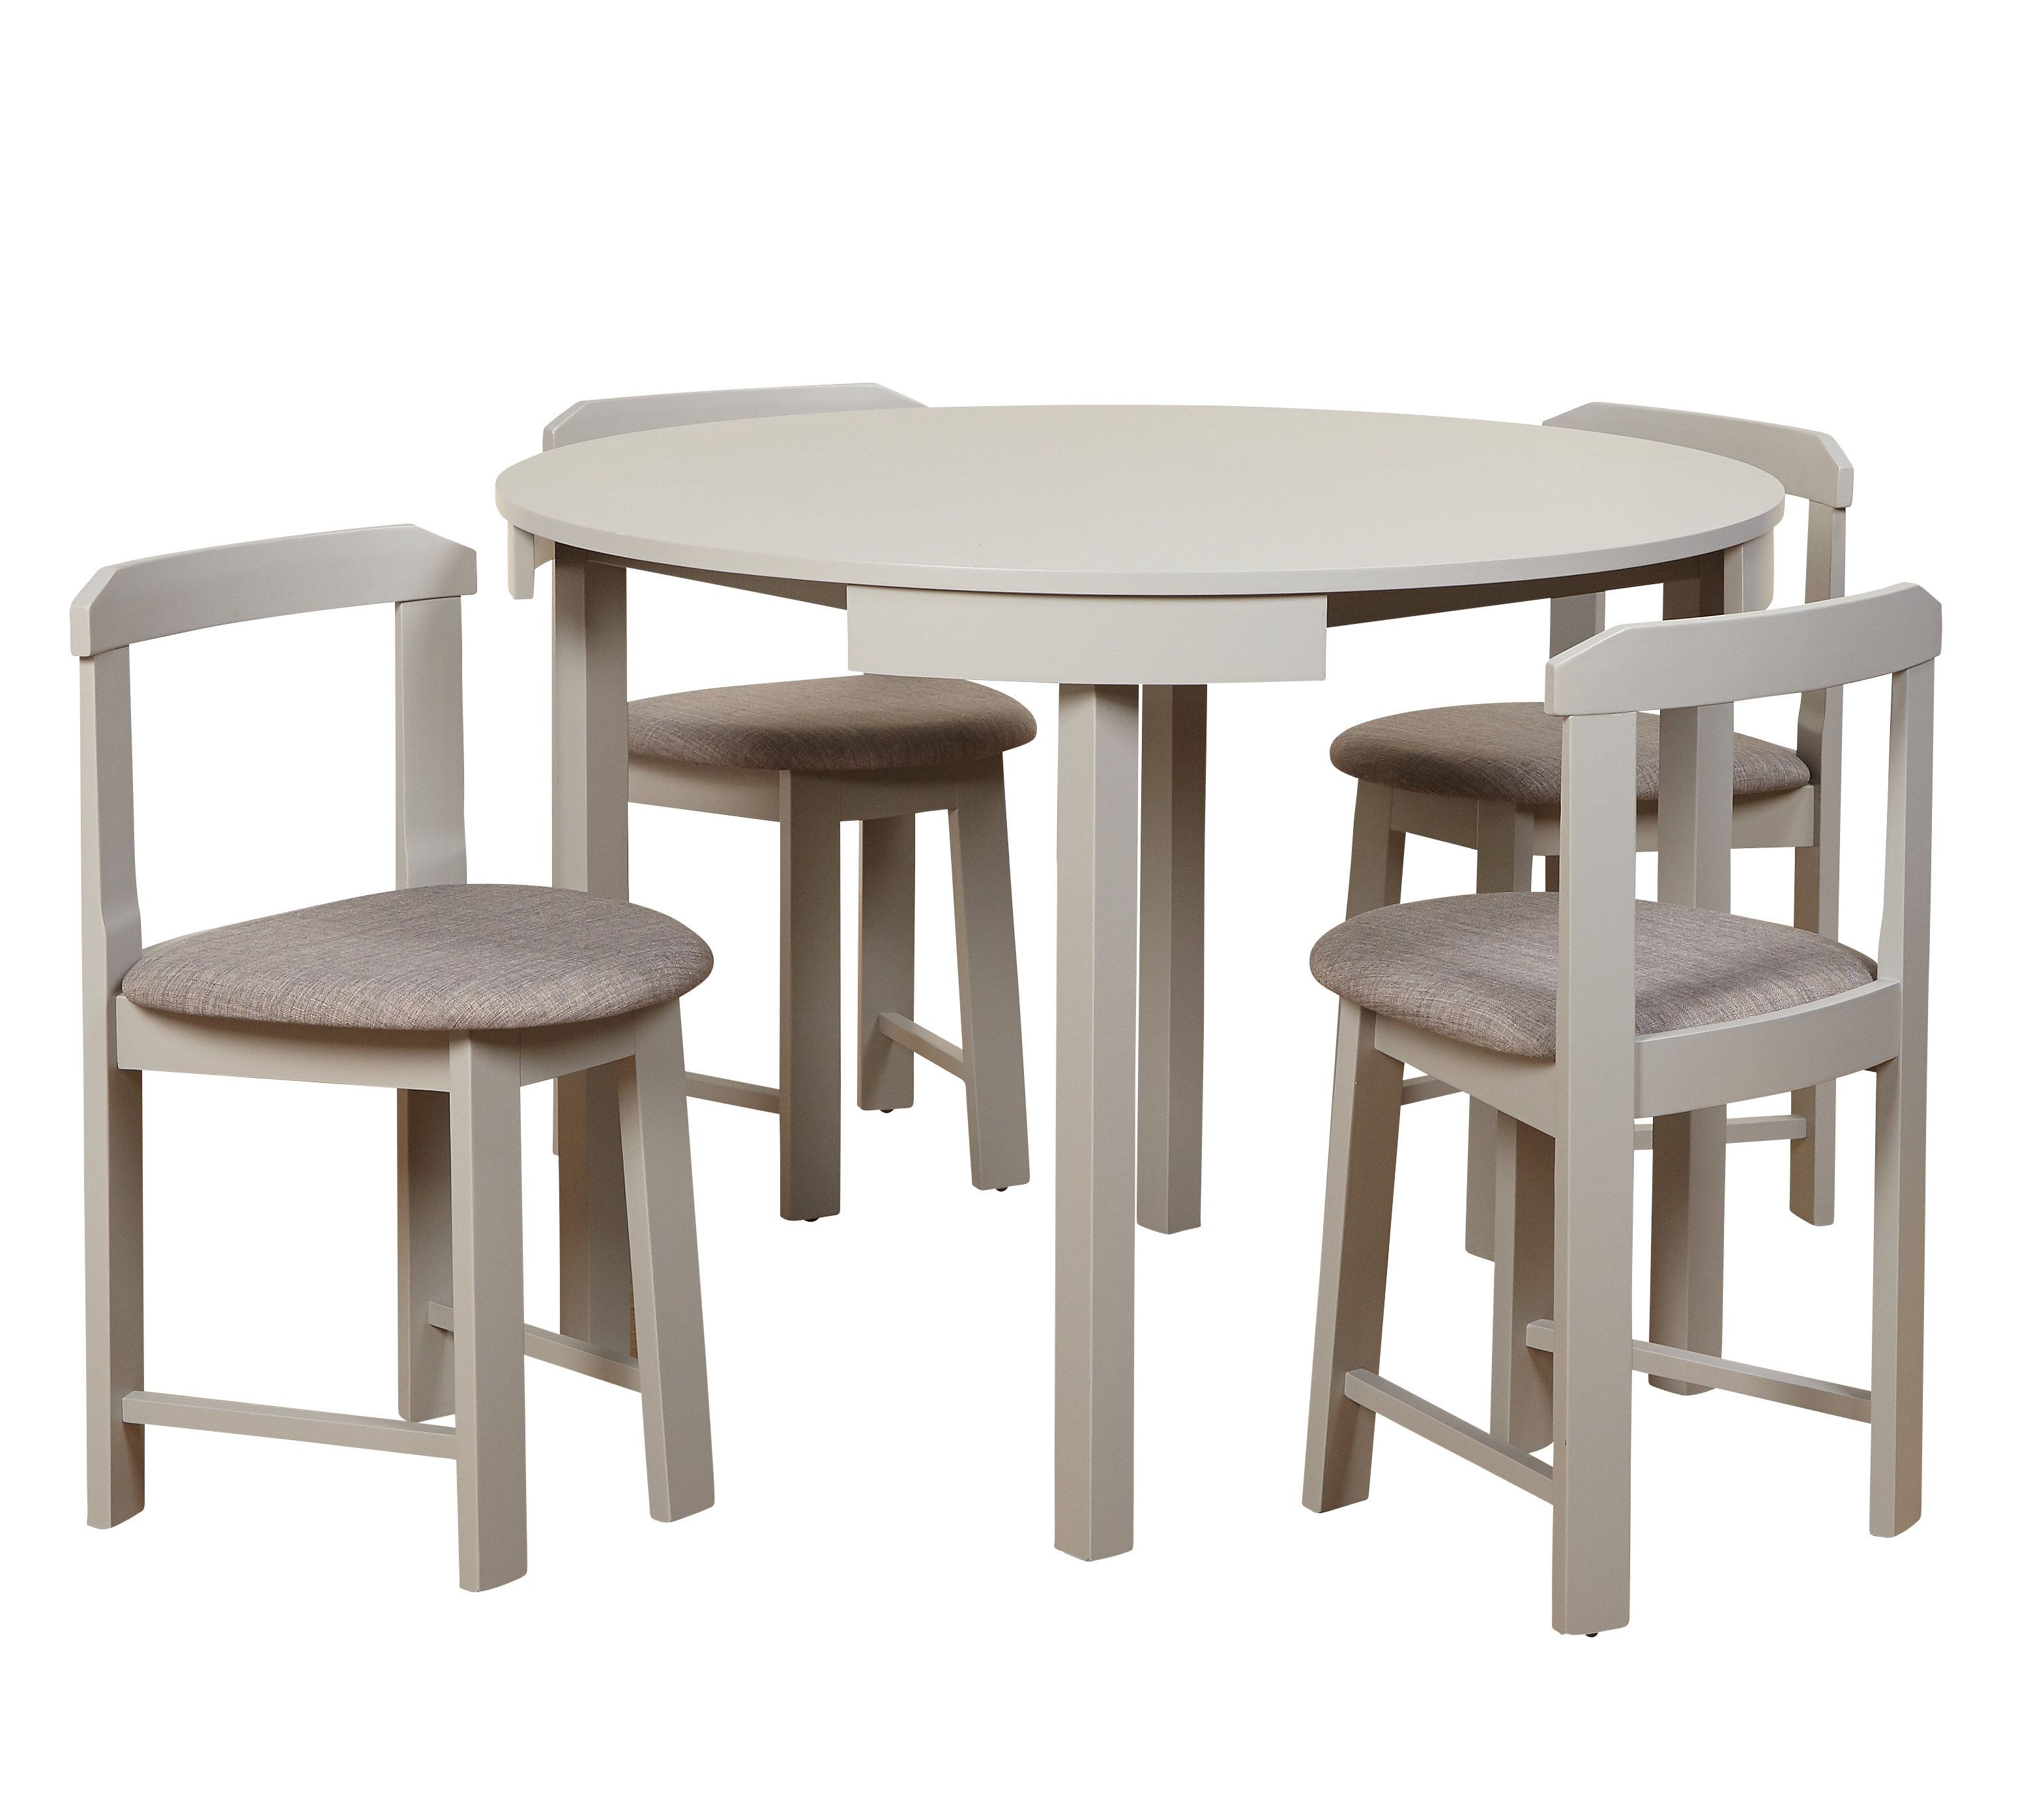 Newest Mabelle 5 Piece Dining Set With Regard To Kerley 4 Piece Dining Sets (View 8 of 20)